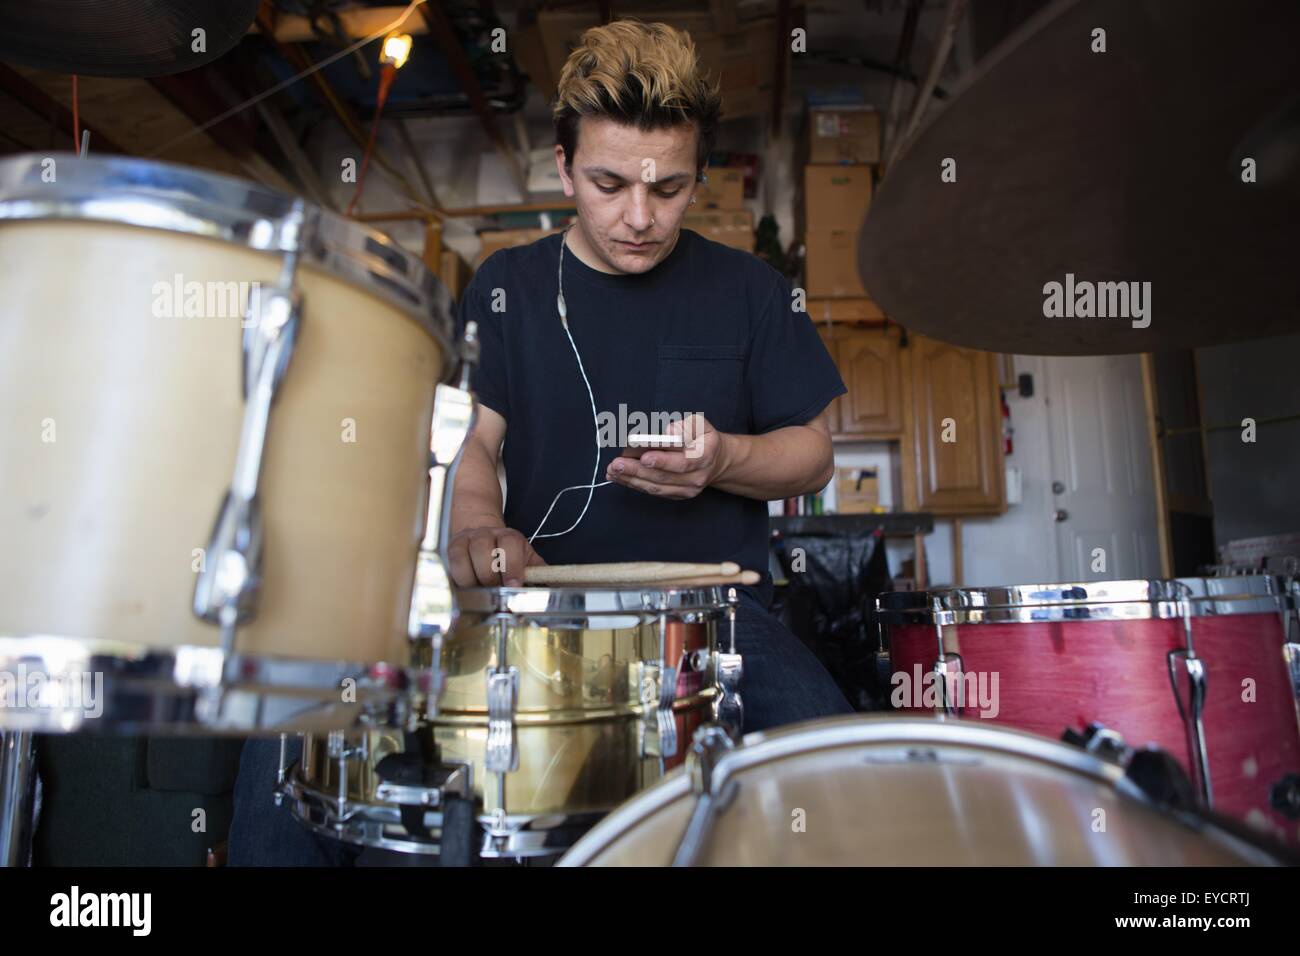 Young male drummer in basement reading smartphone texts Stock Photo